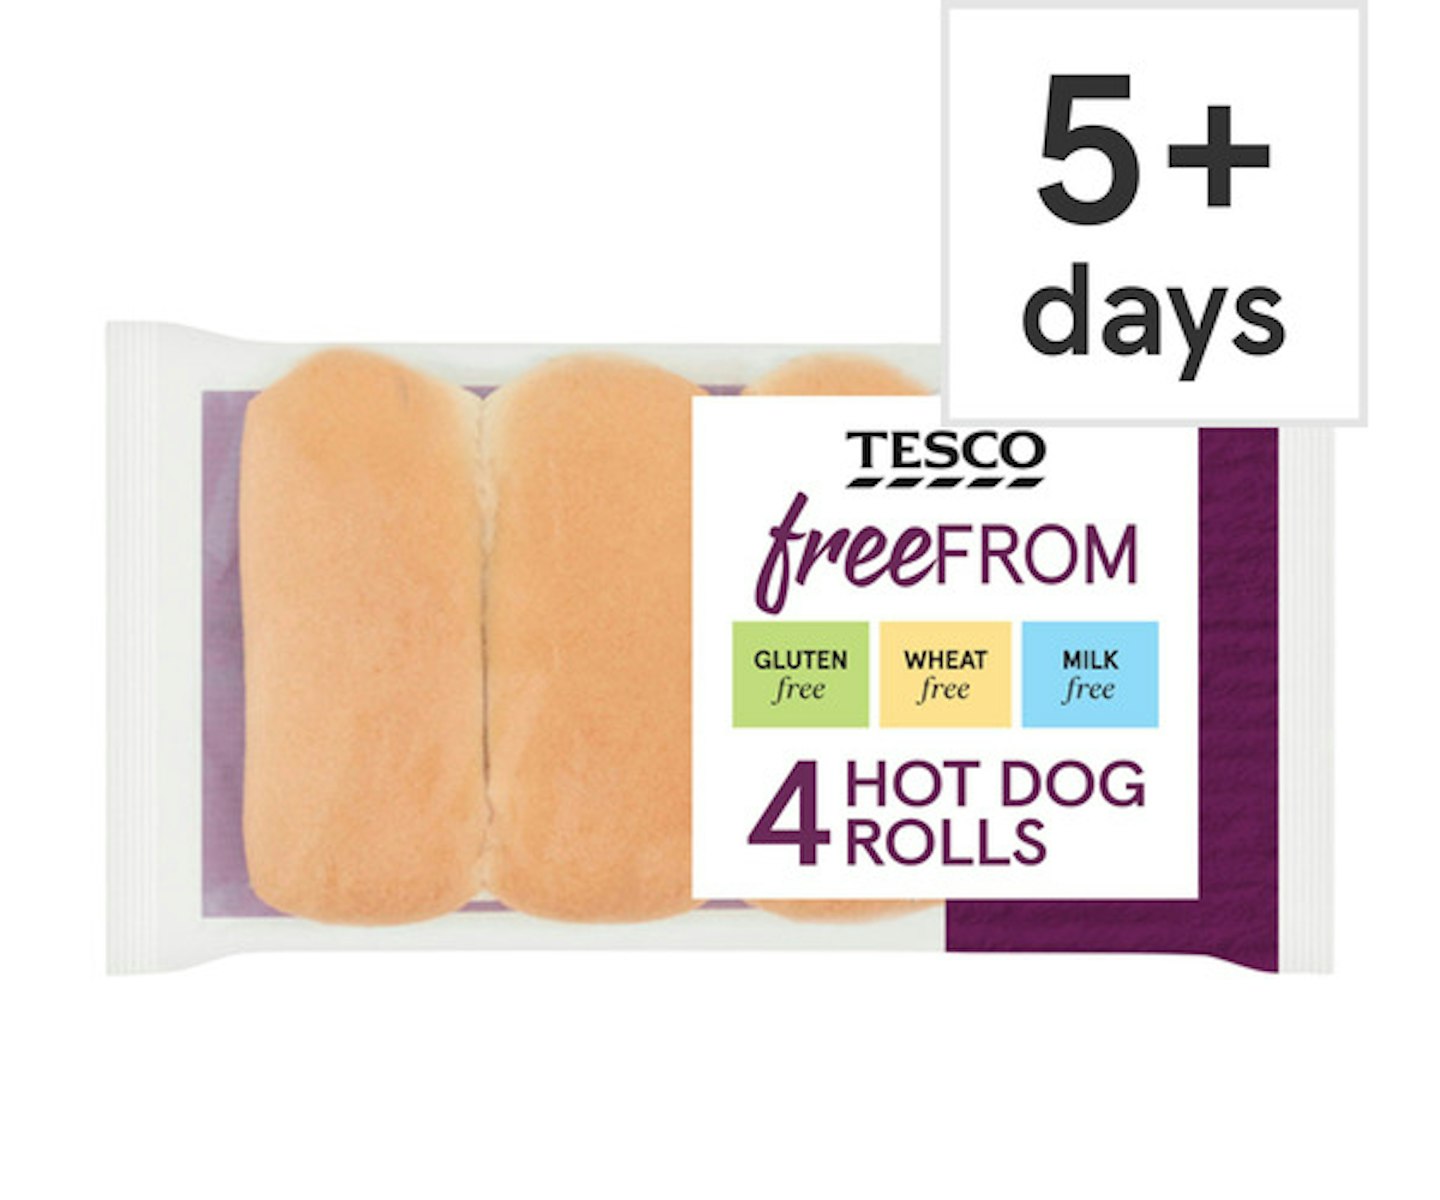 Tesco Free From 4 Hot Dog Rolls